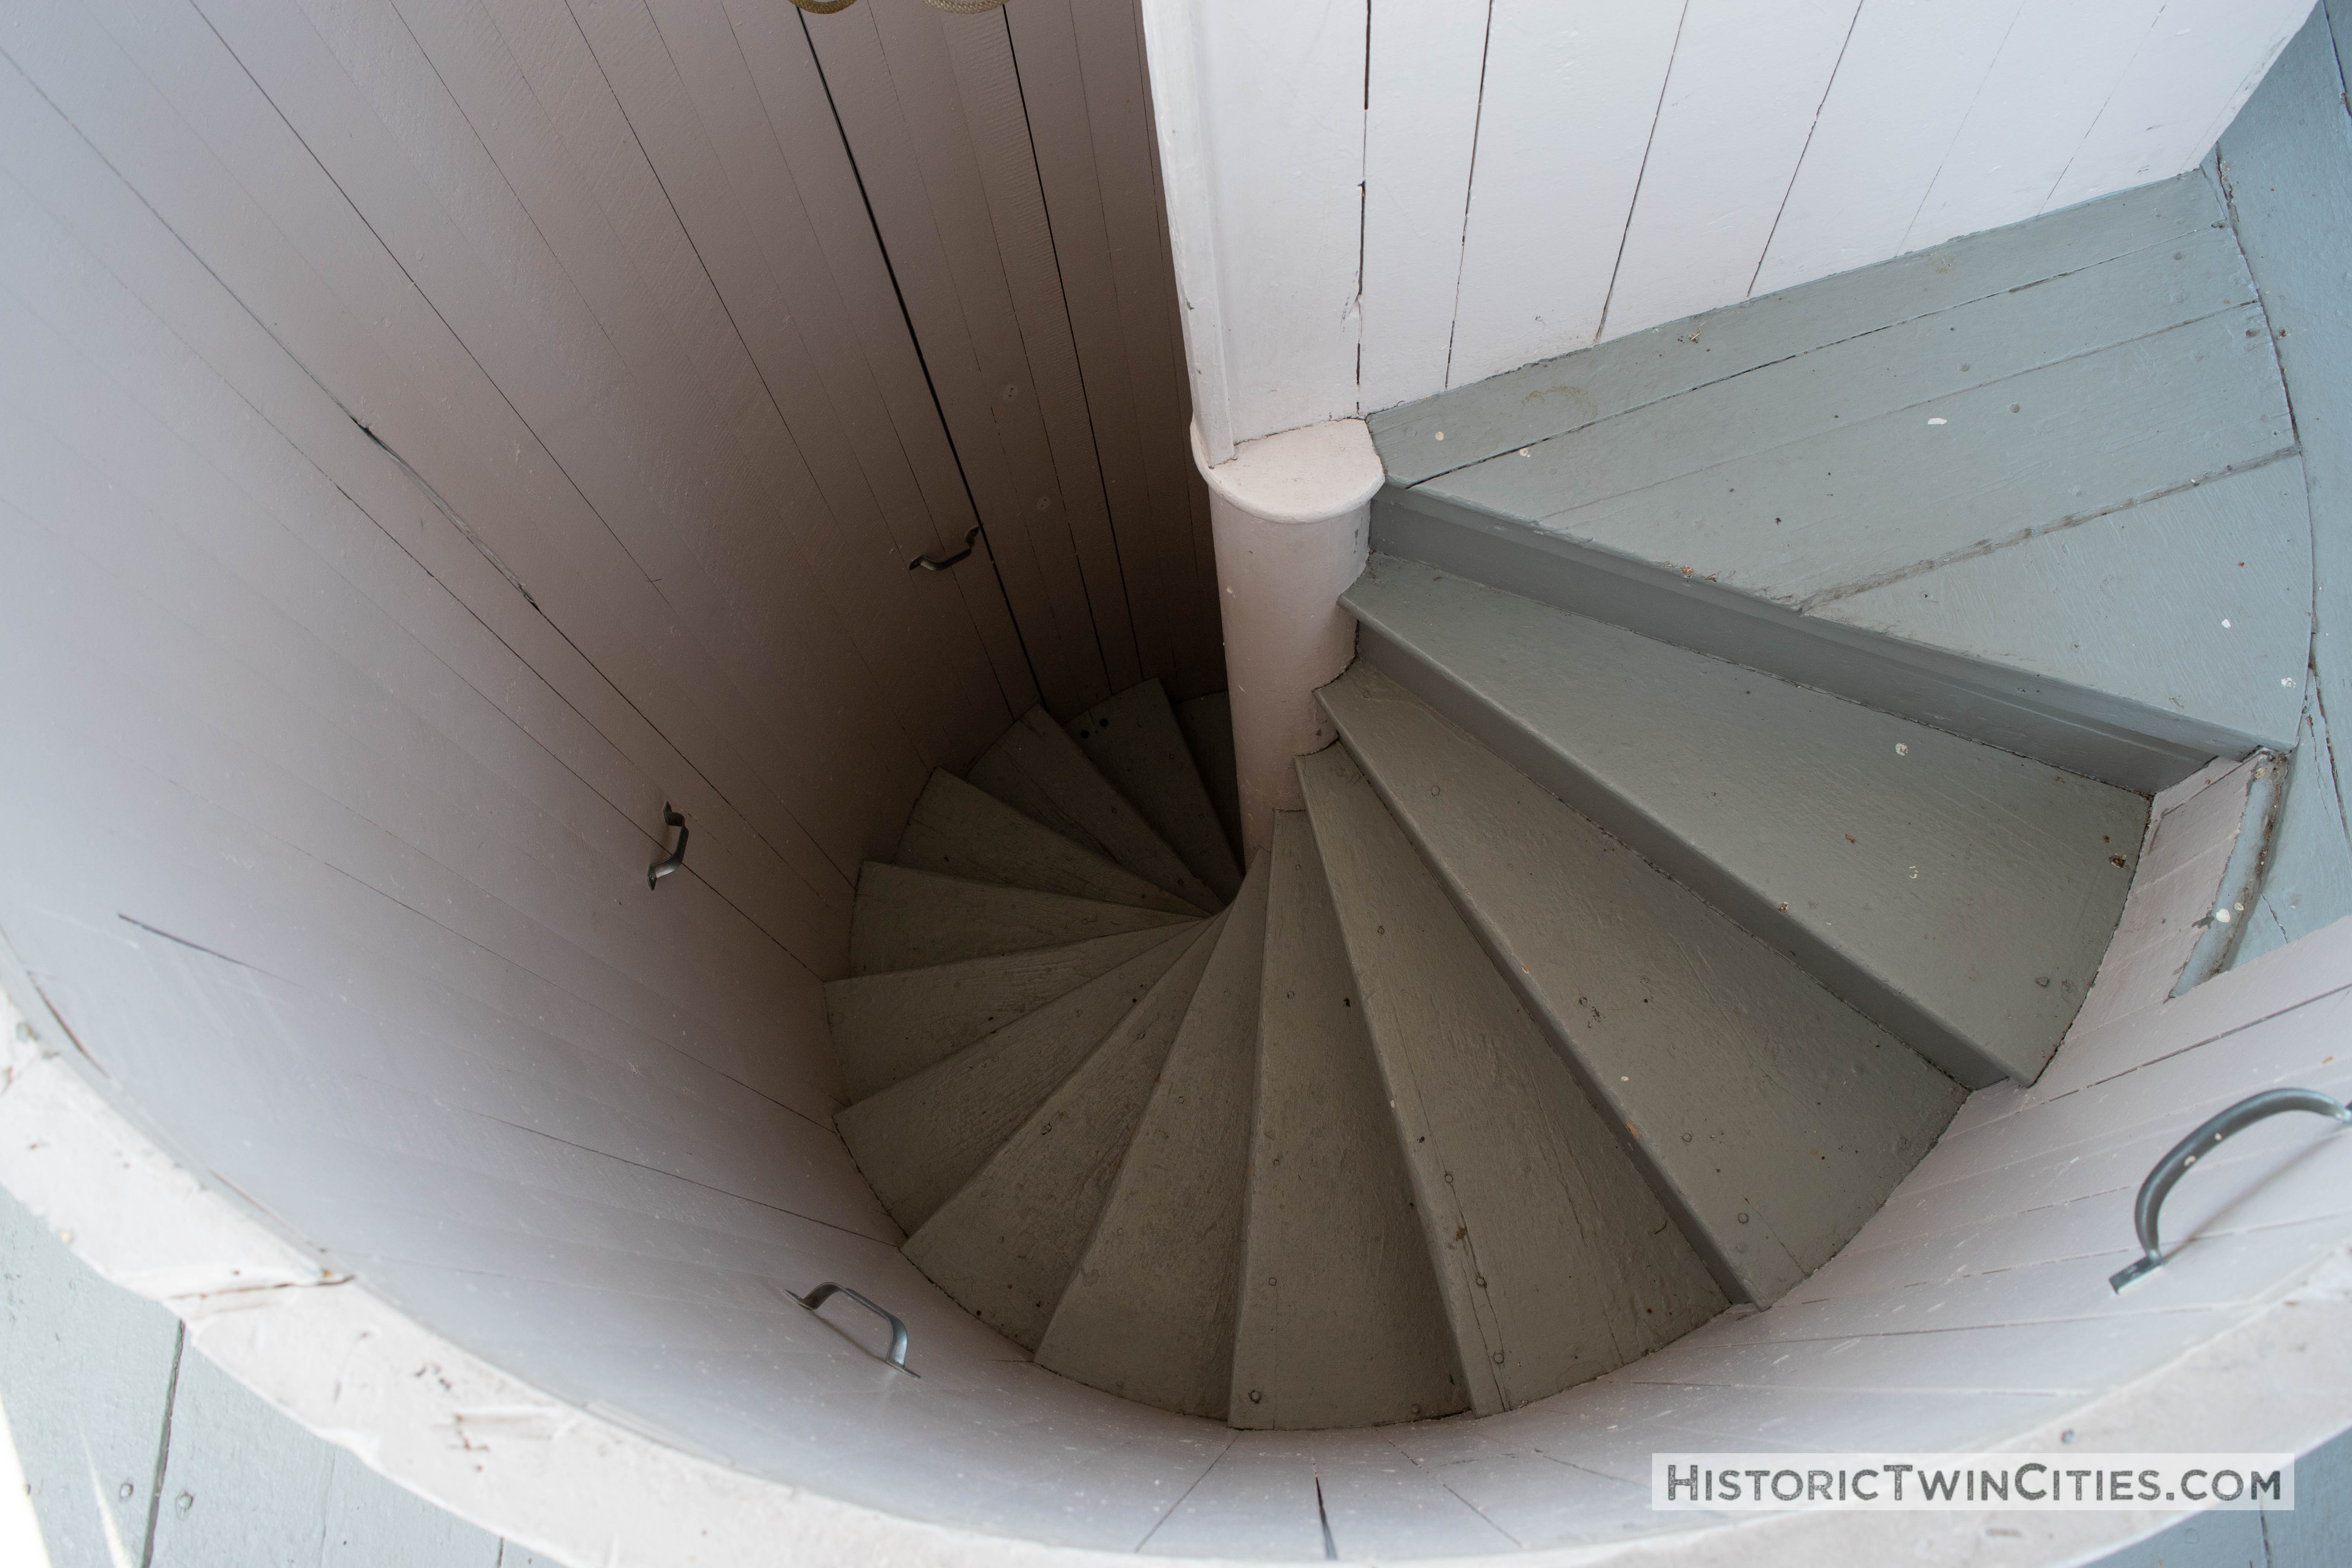 Spiral stairway leading from the dome of the Historic Washington County Courthouse - Stillwater, MN